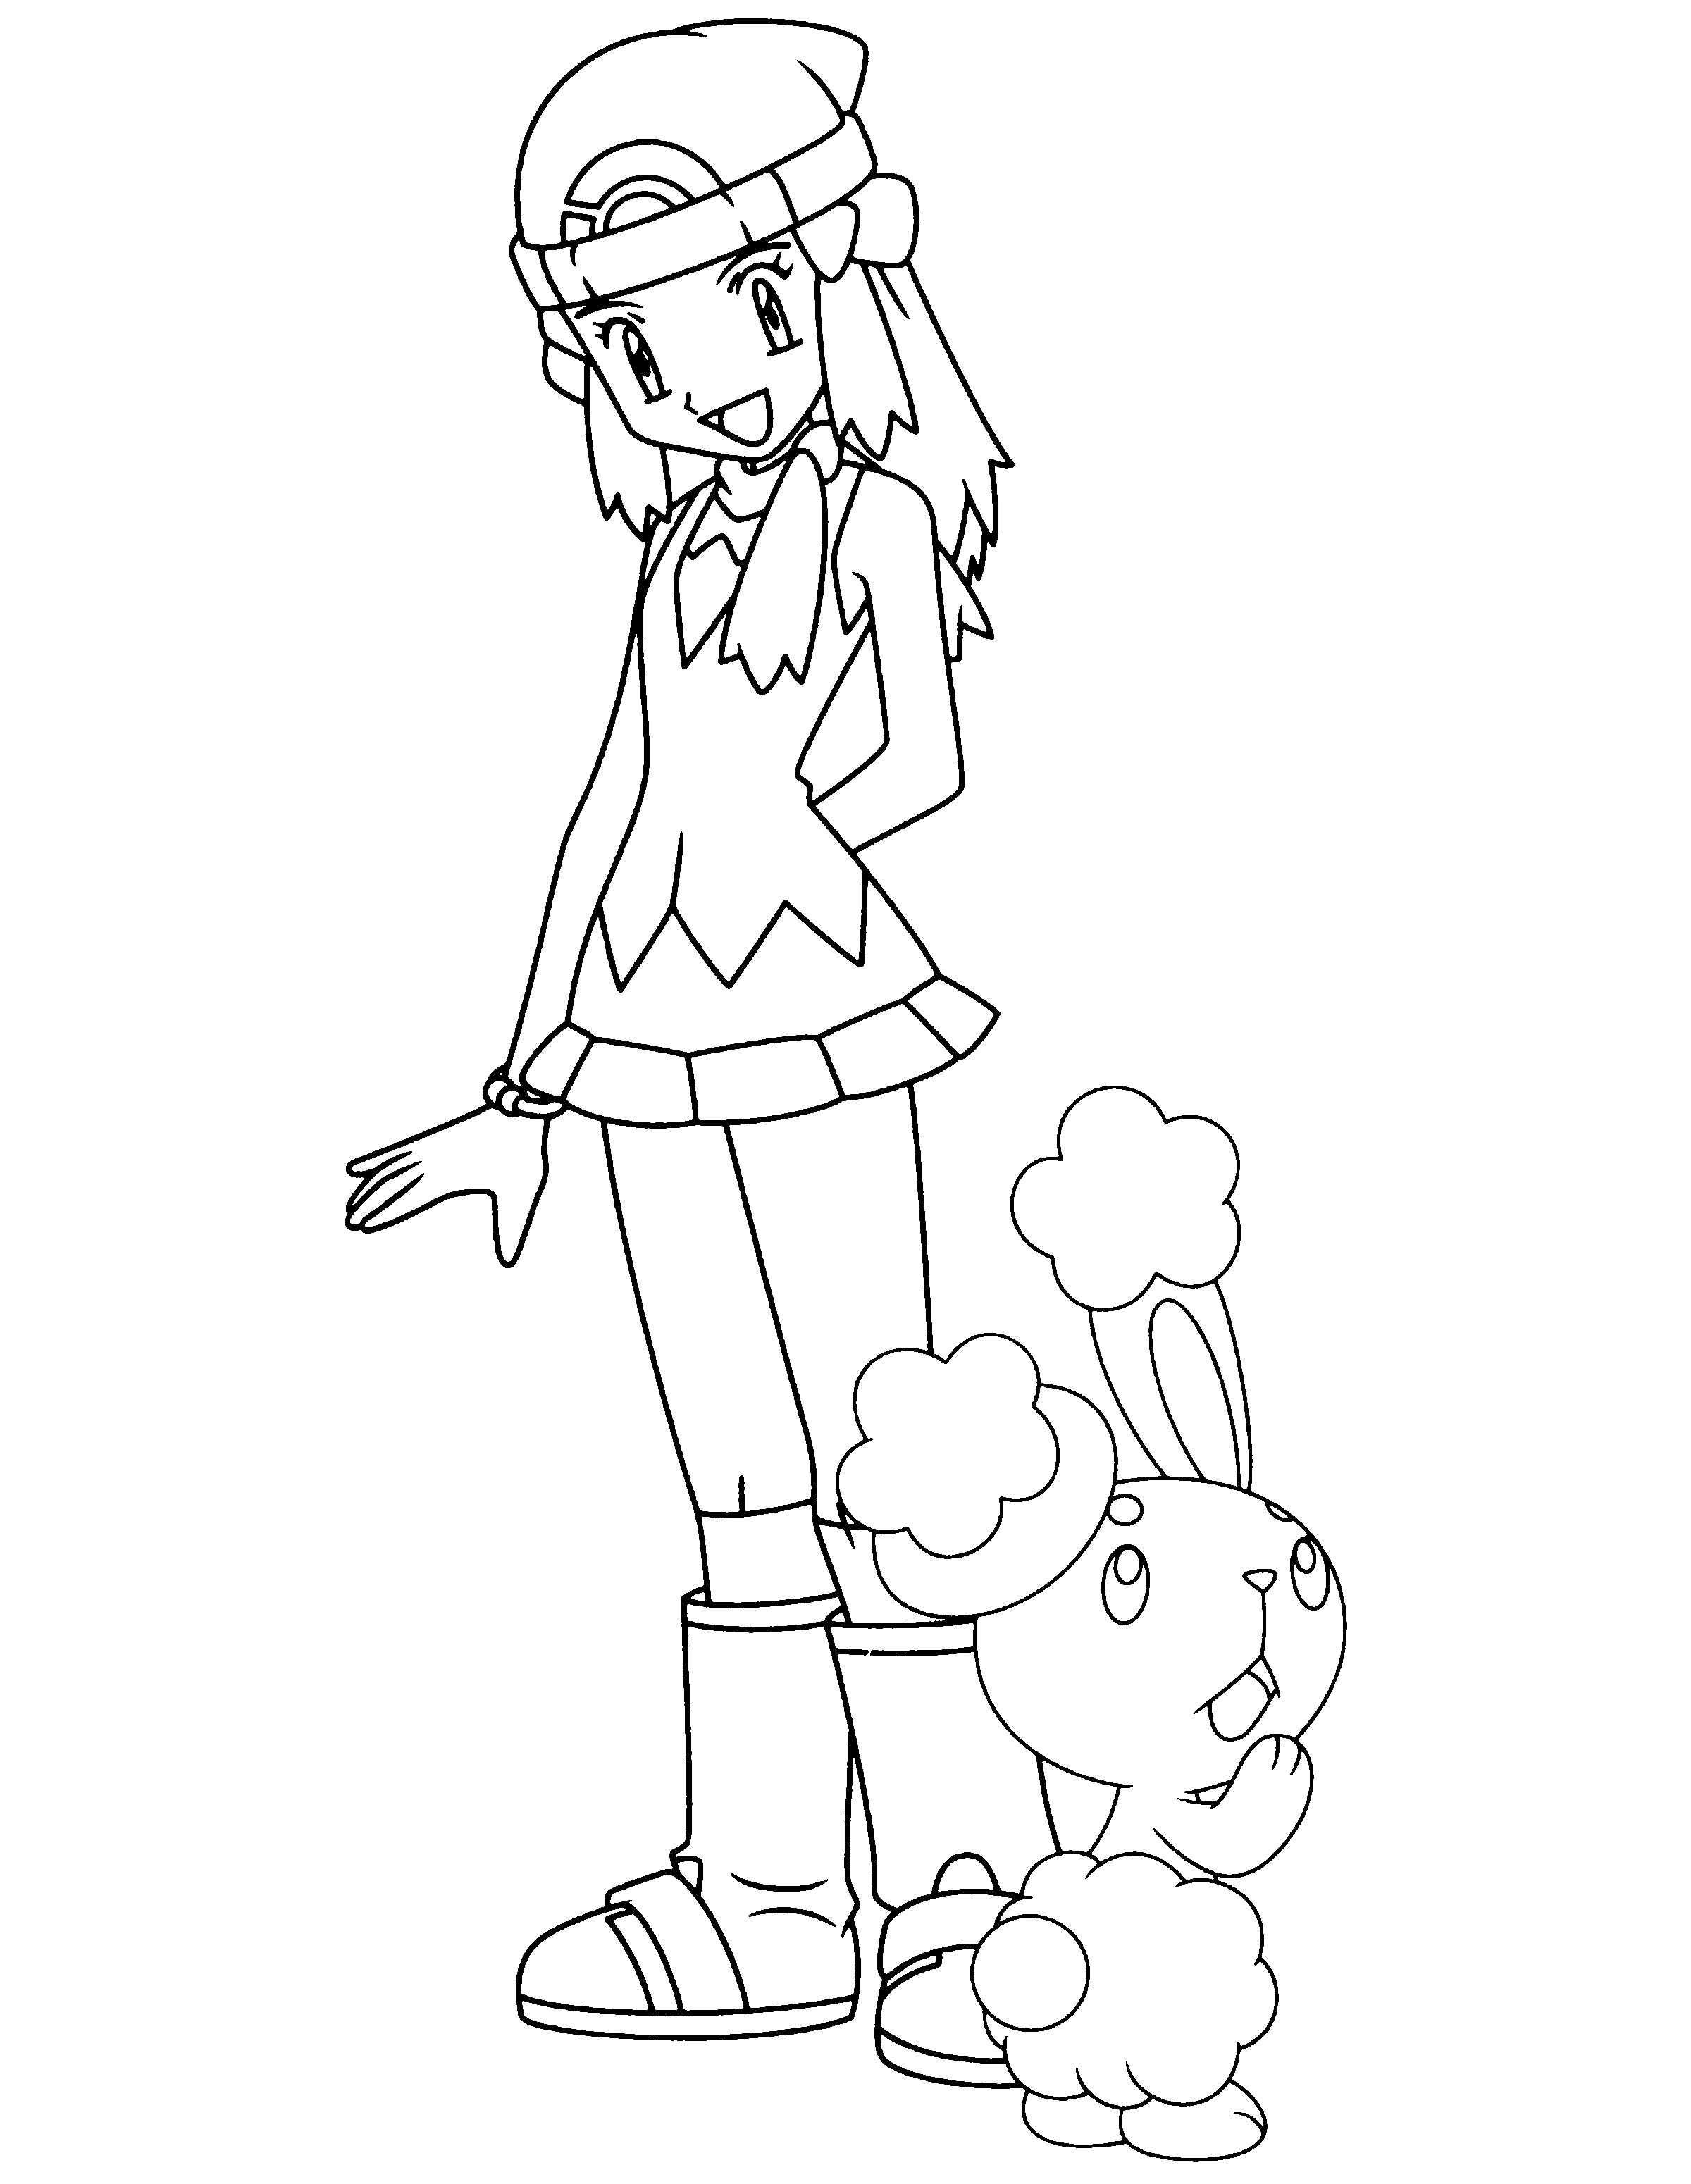 Pokemon Trainer Coloring Page Coloring Home